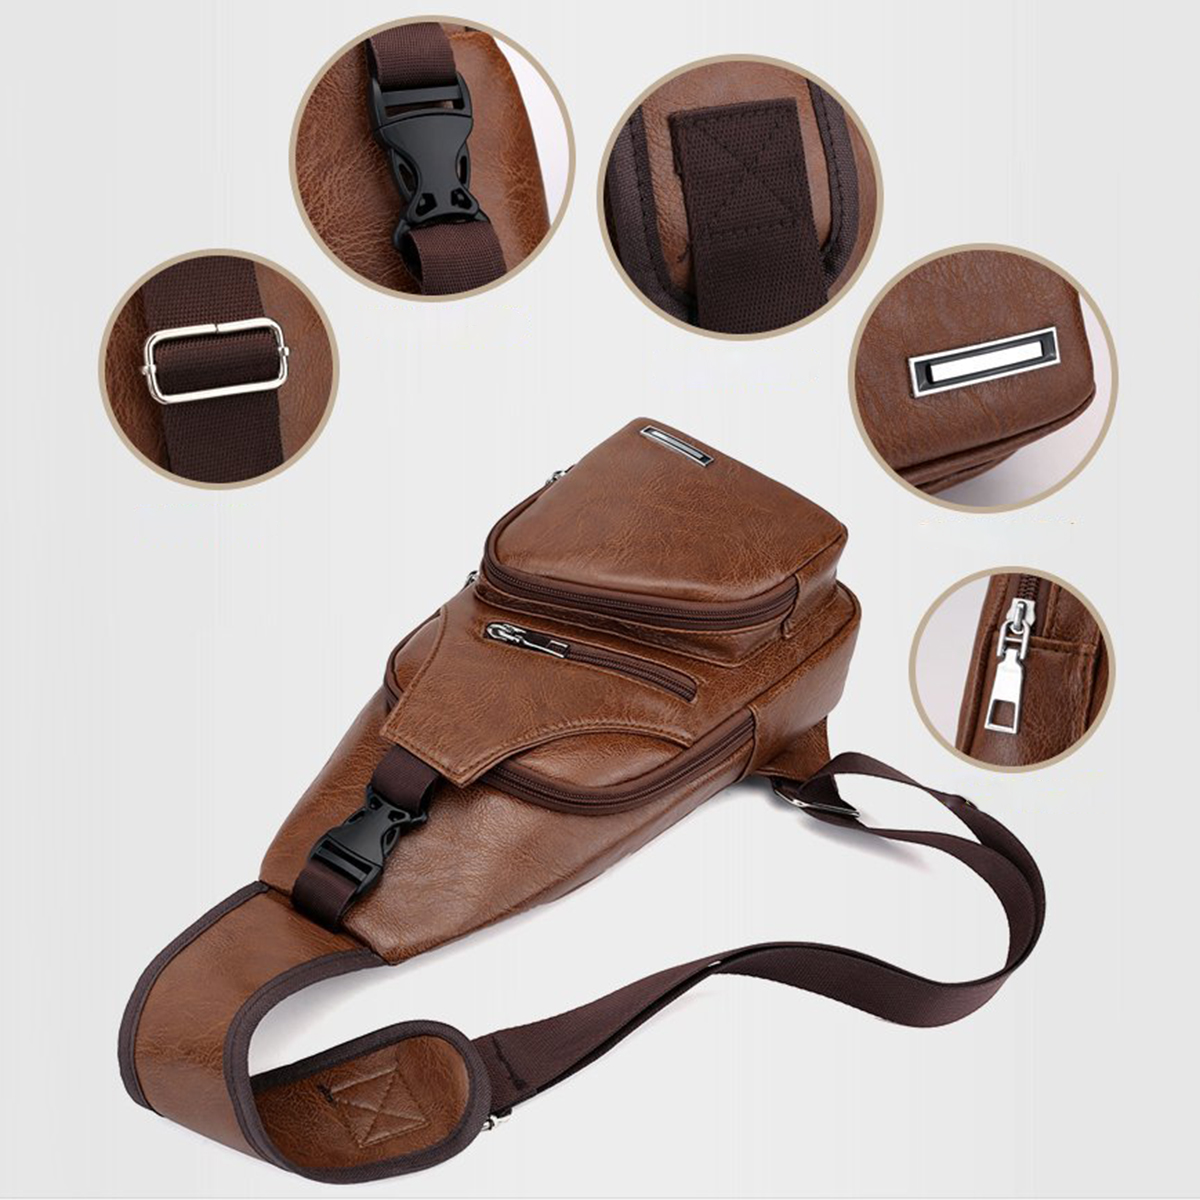 Casual-Outdoor-Travel-USB-Charging-Port-Sling-Bag-Leather-Chest-Bag-Crossbody-Bag-1637756-4